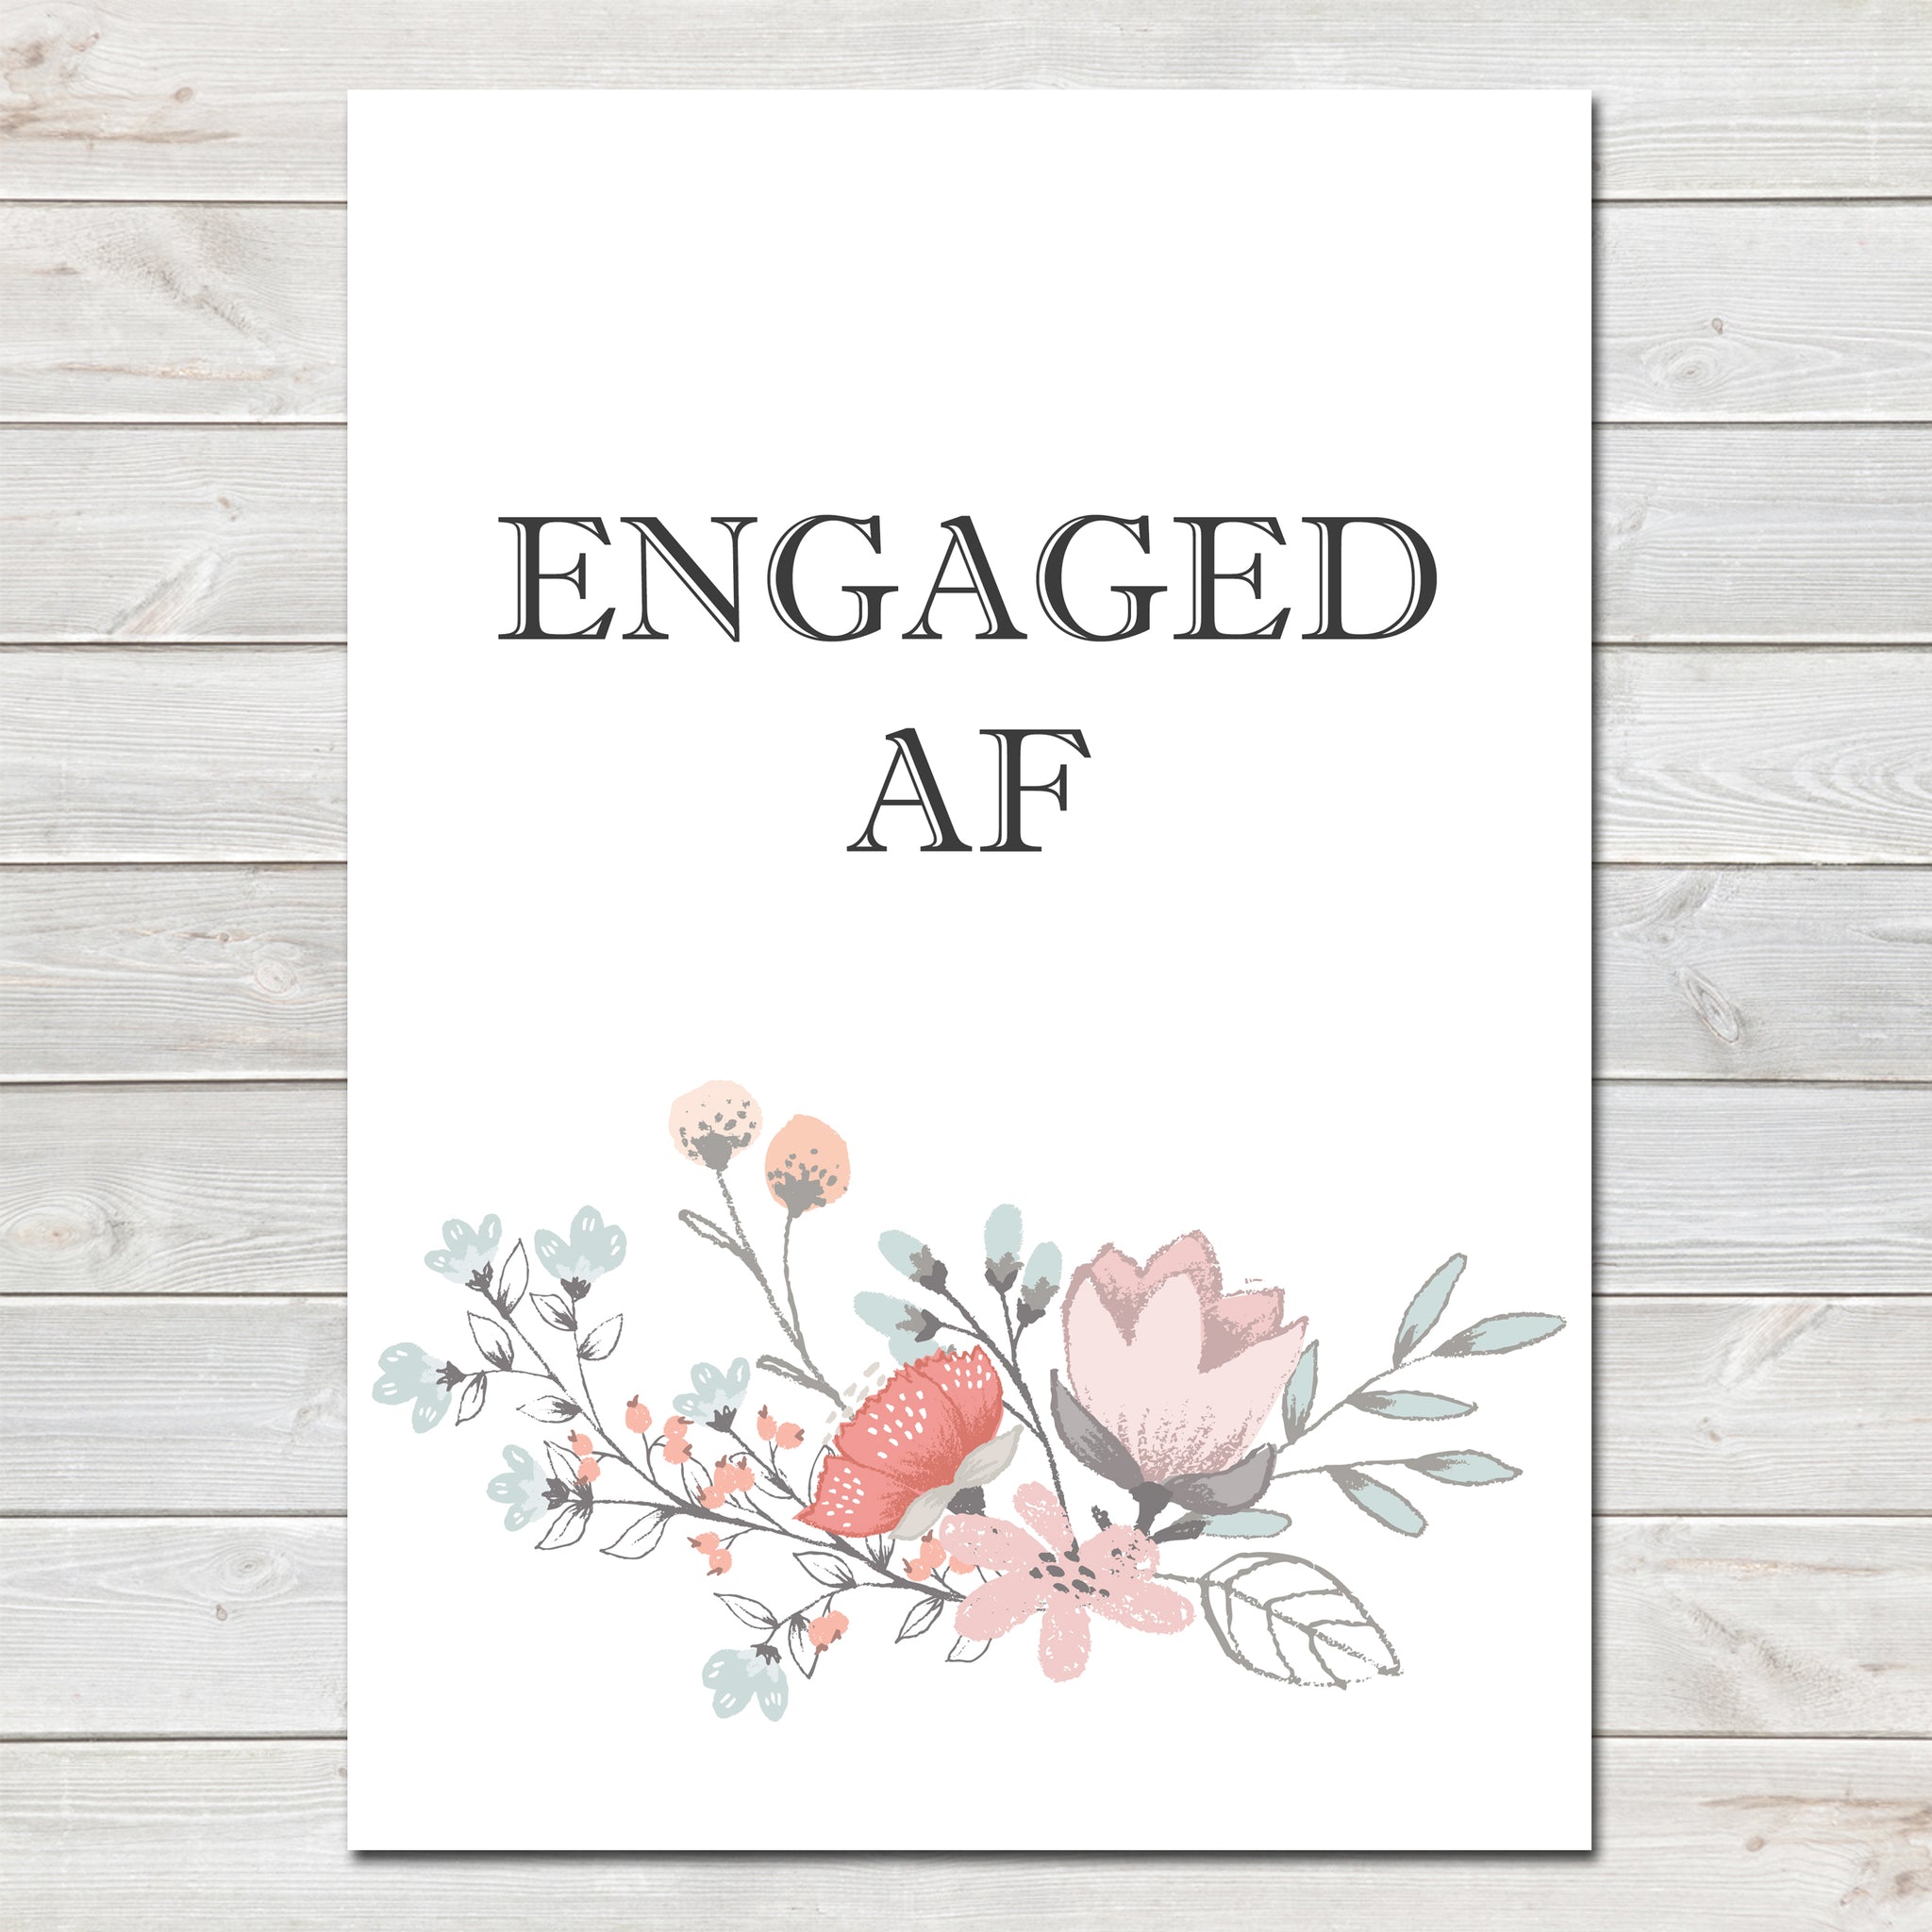 Engagement Party Engaged AF (As F***) Floral Poster / Photo Prop / Sign